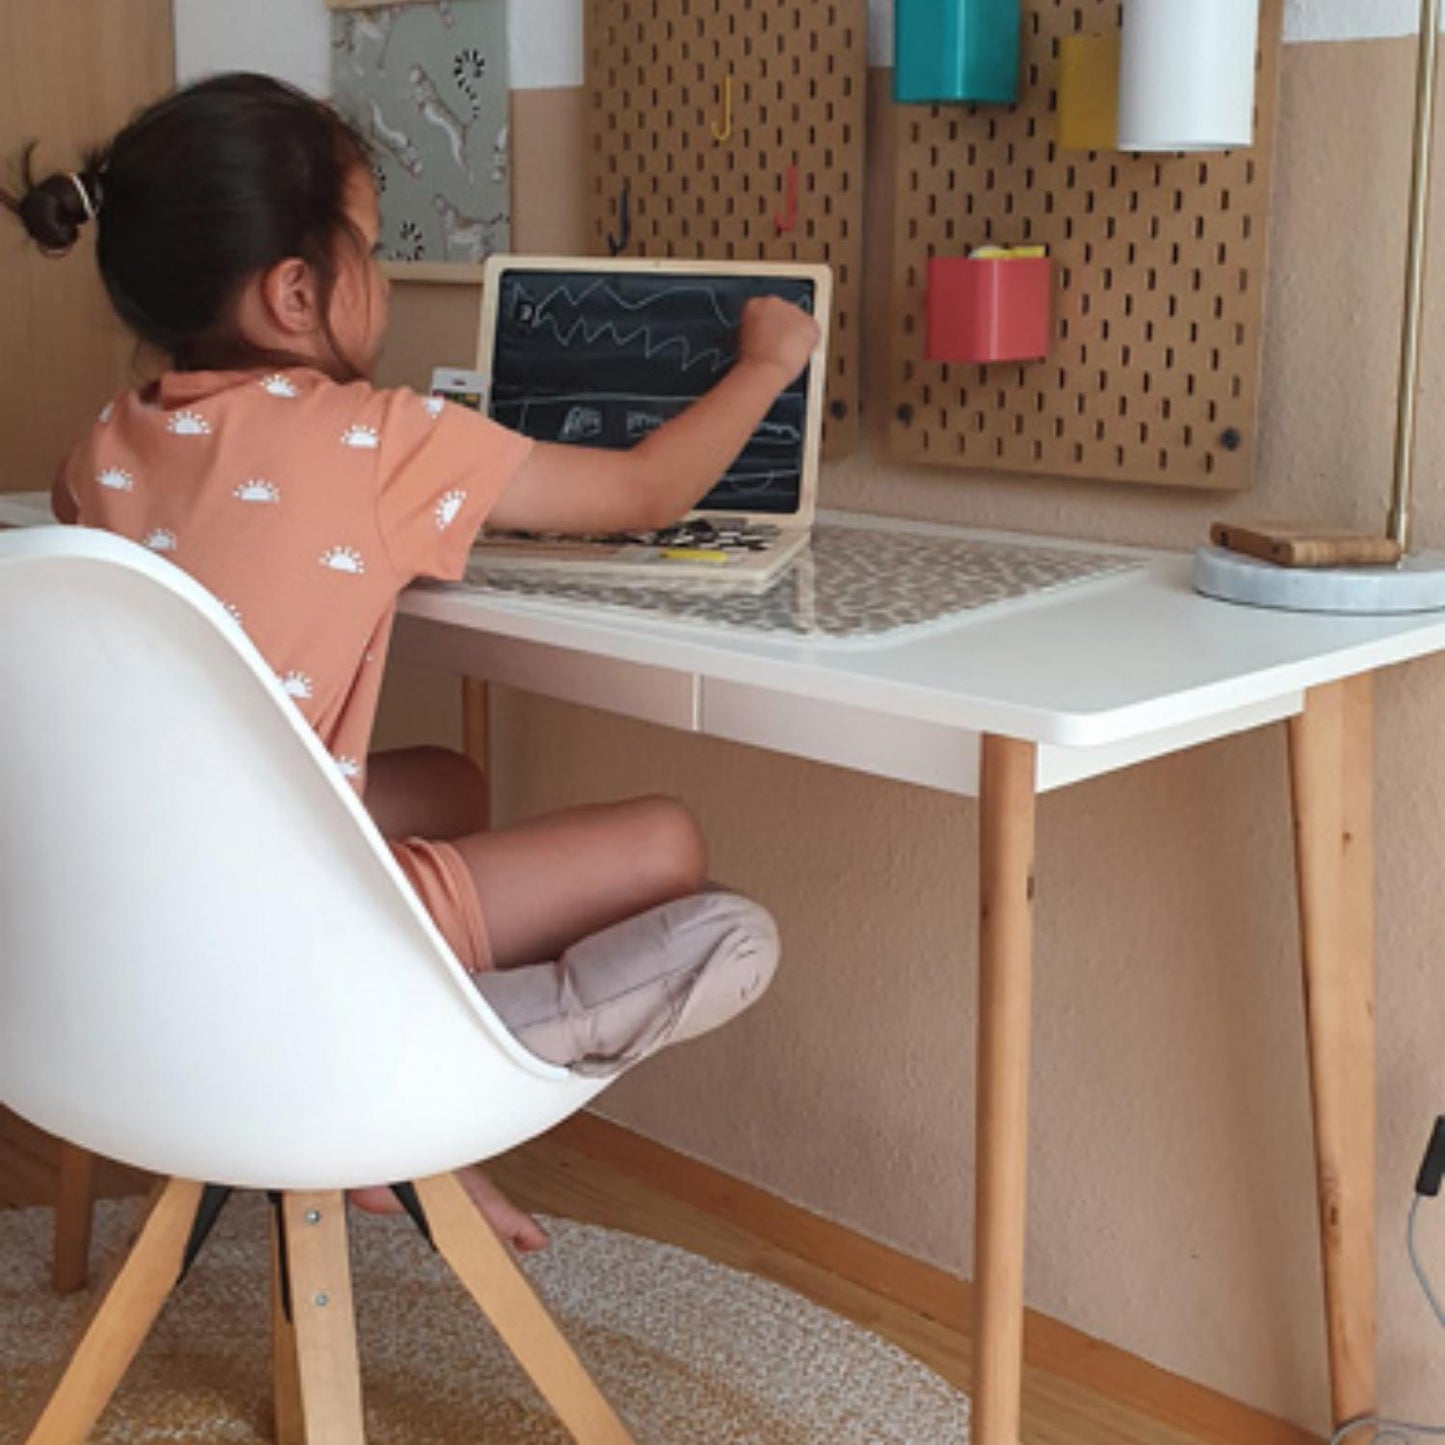 Small Foot 2-in-1 Magnetic Wooden Blackboard Laptop | Wooden Educational Toy | Lifestyle: Girl Sitting at Desk and Drawing on Blackboard | BeoVERDE.ie